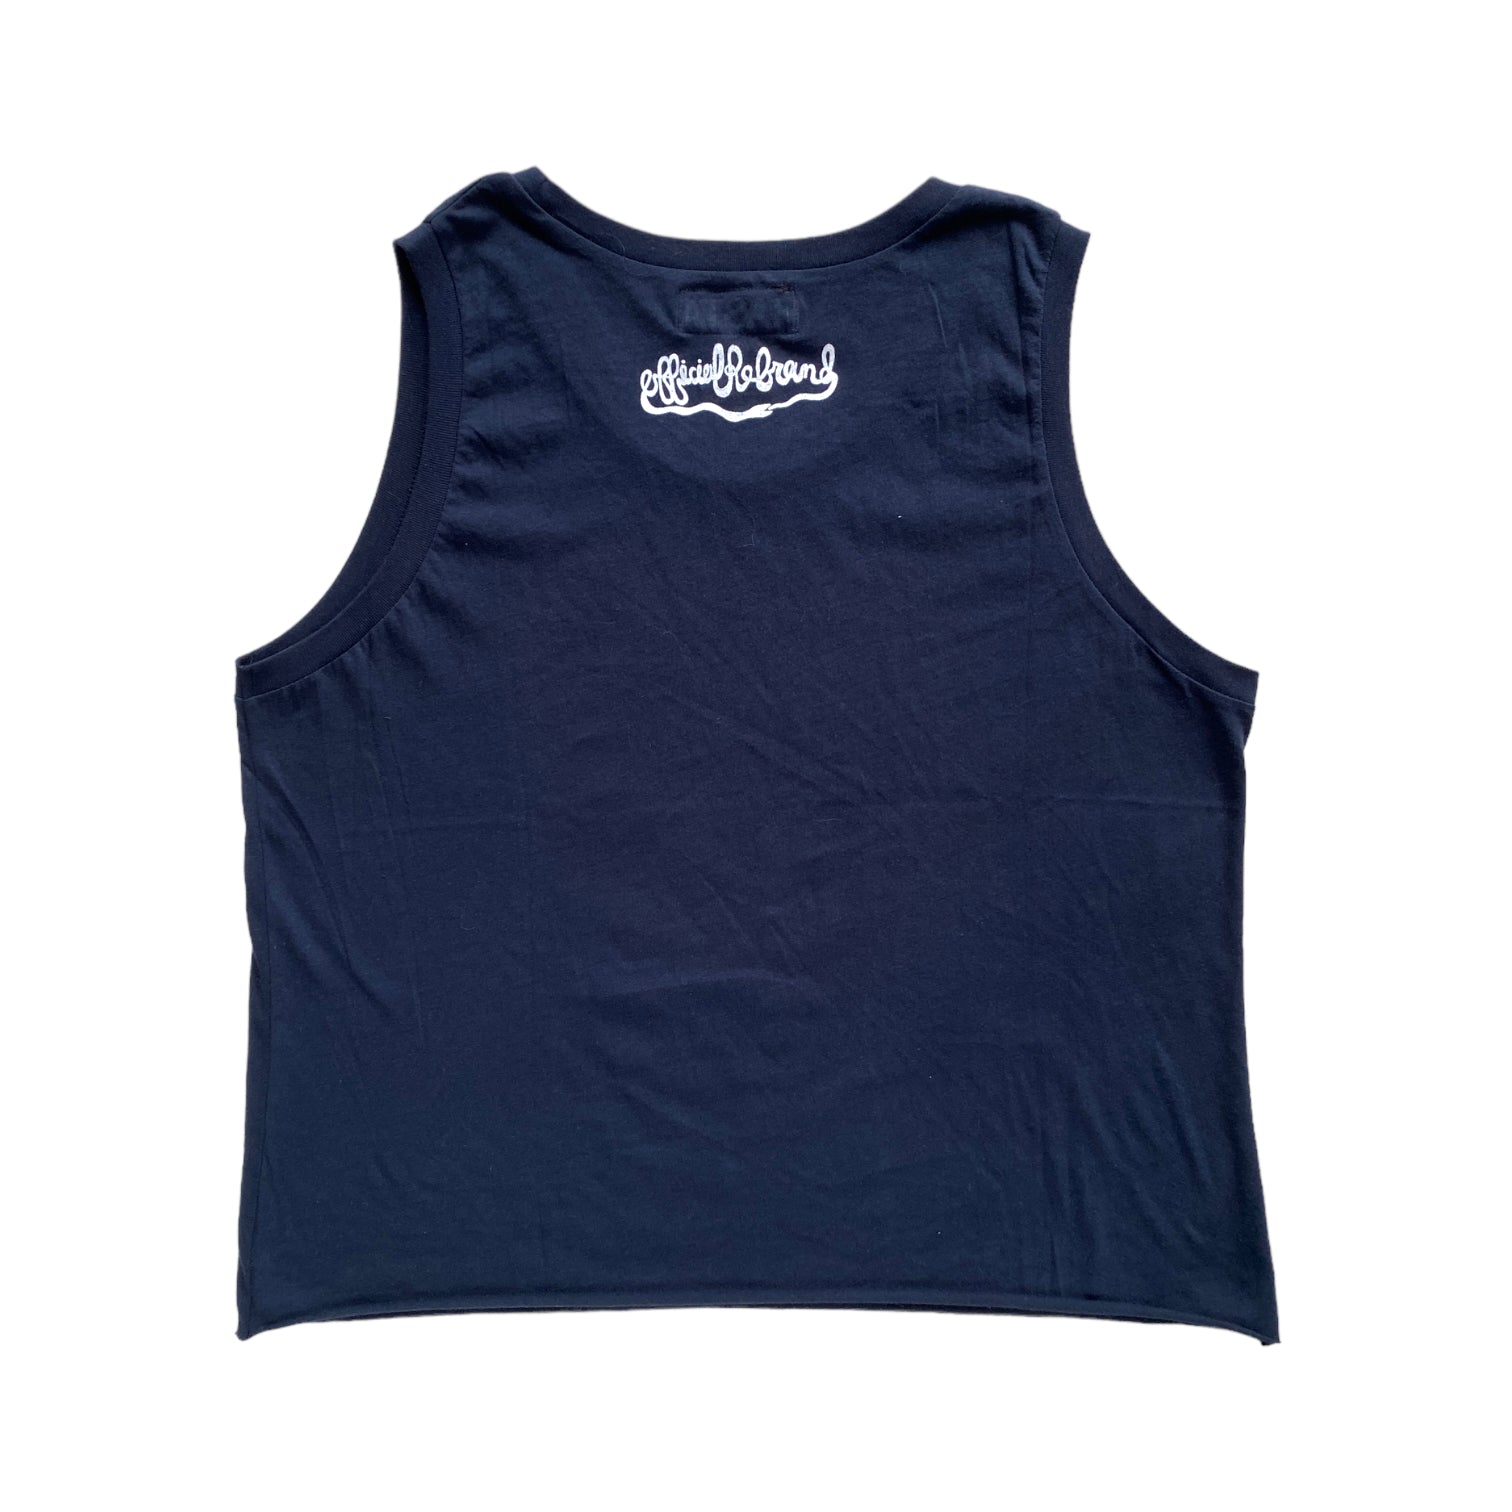 back of navy blue tank top with white screen-printed Official rebrand ouroboros snake logo in white